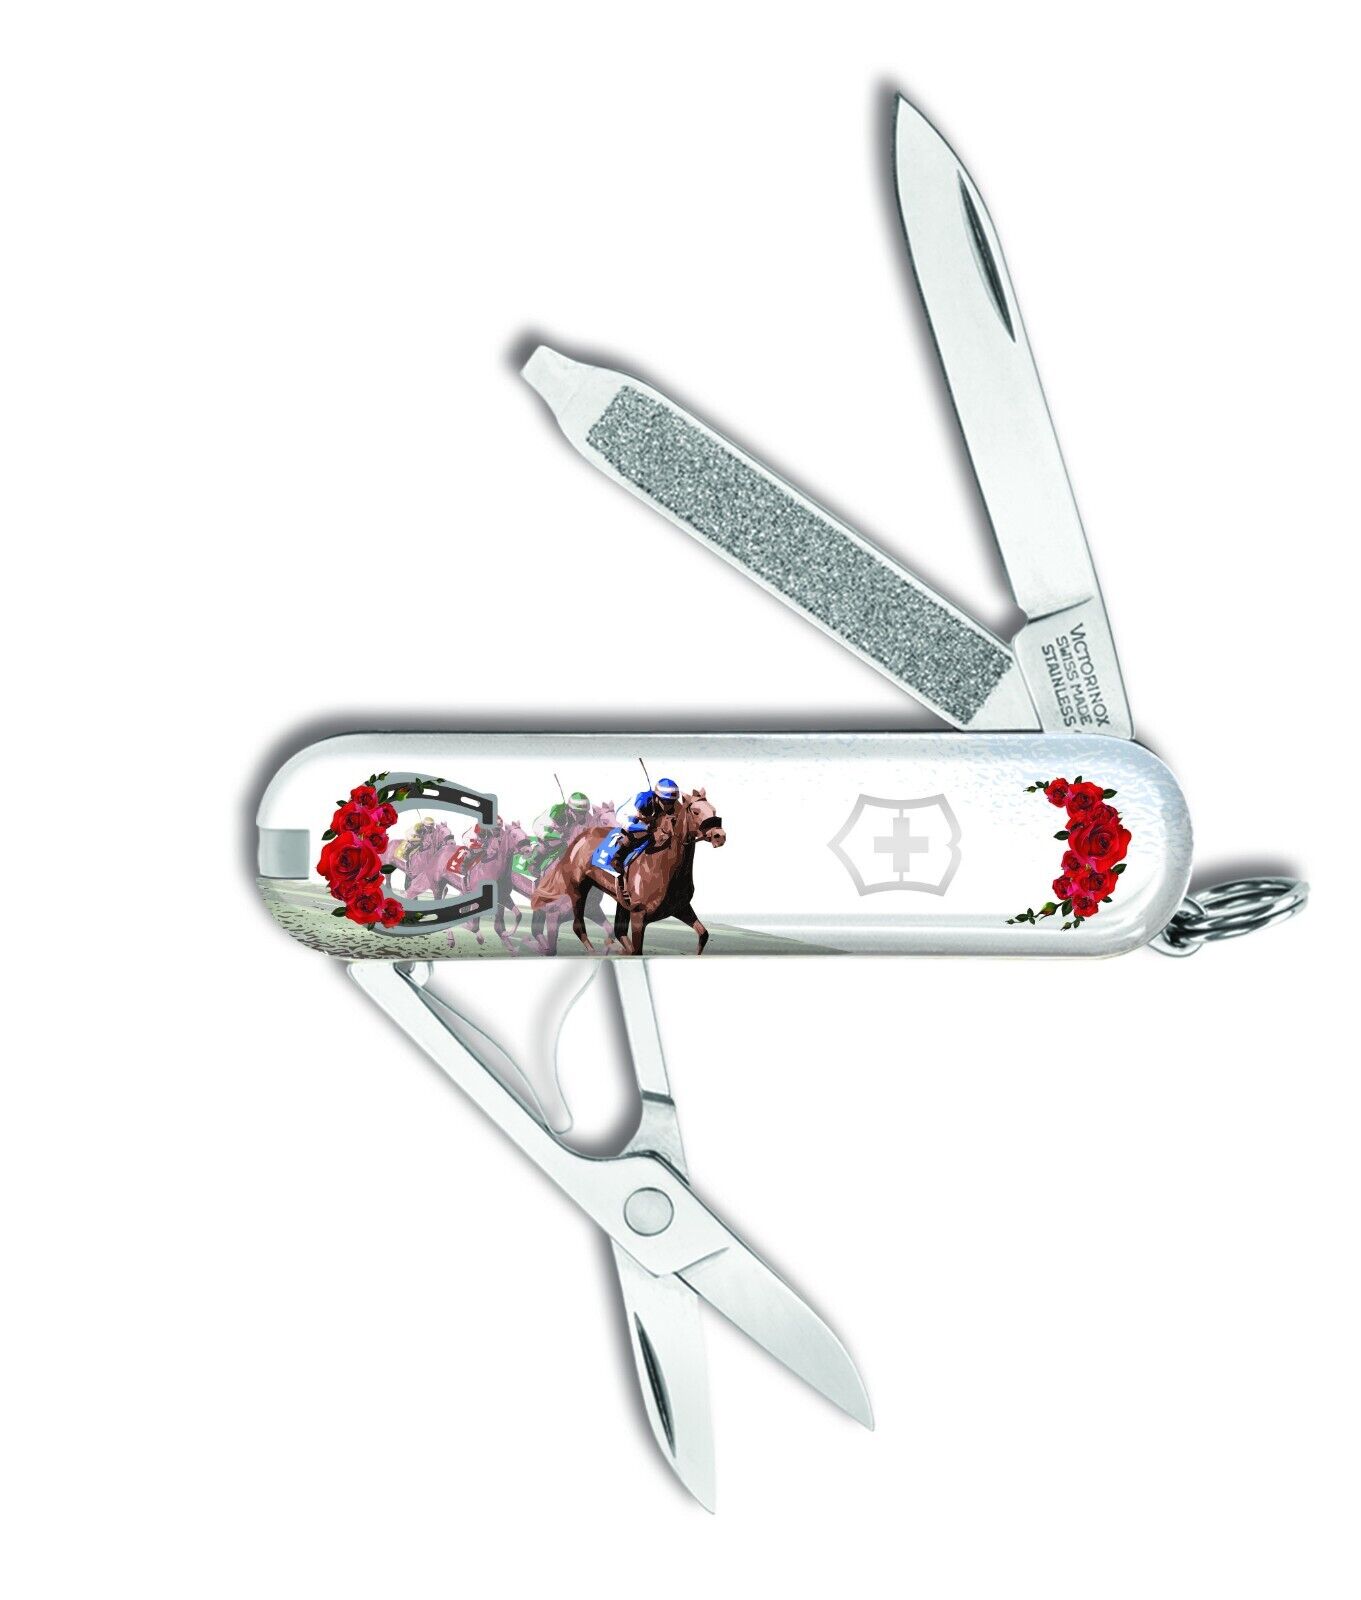 VICTORINOX SWISS ARMY KNIVES KENTUCKY HORSE RACING DERBY CLASSIC SD KNIFE